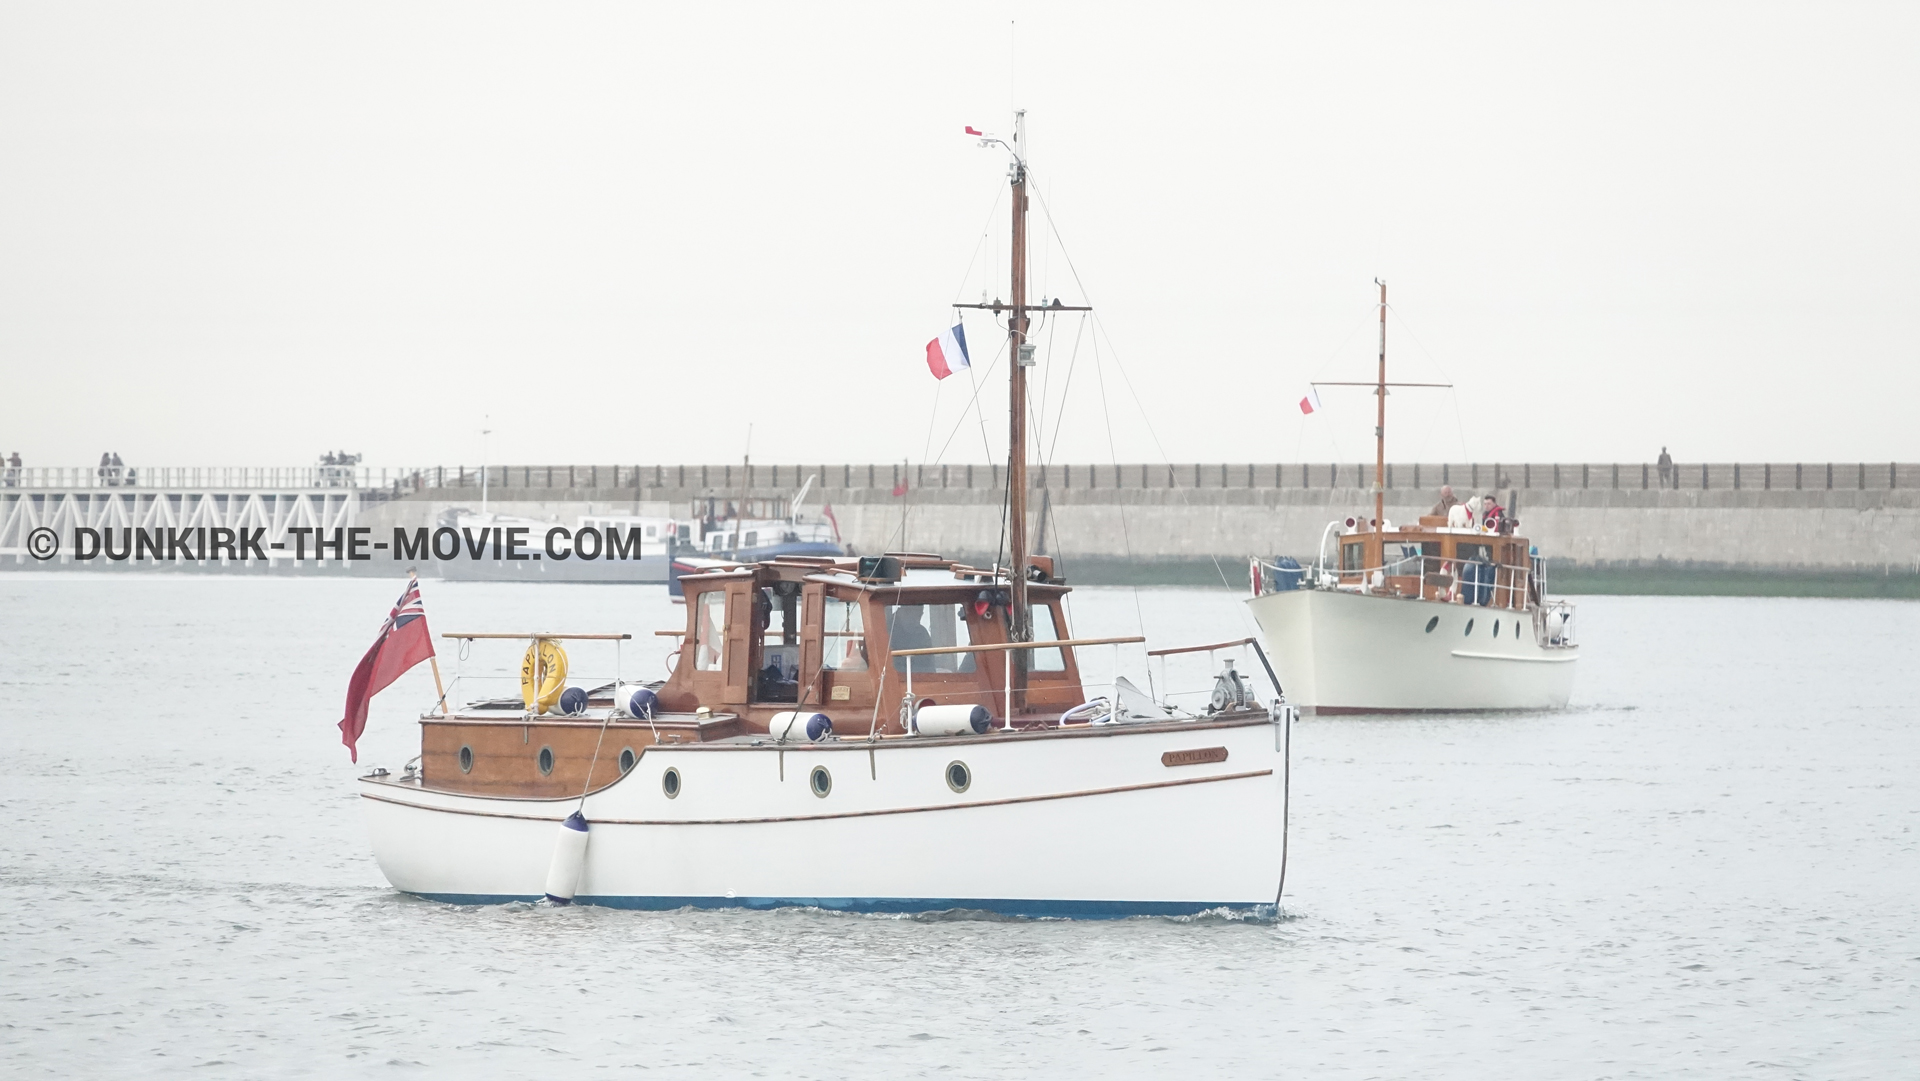 Picture with boat, EST pier,  from behind the scene of the Dunkirk movie by Nolan